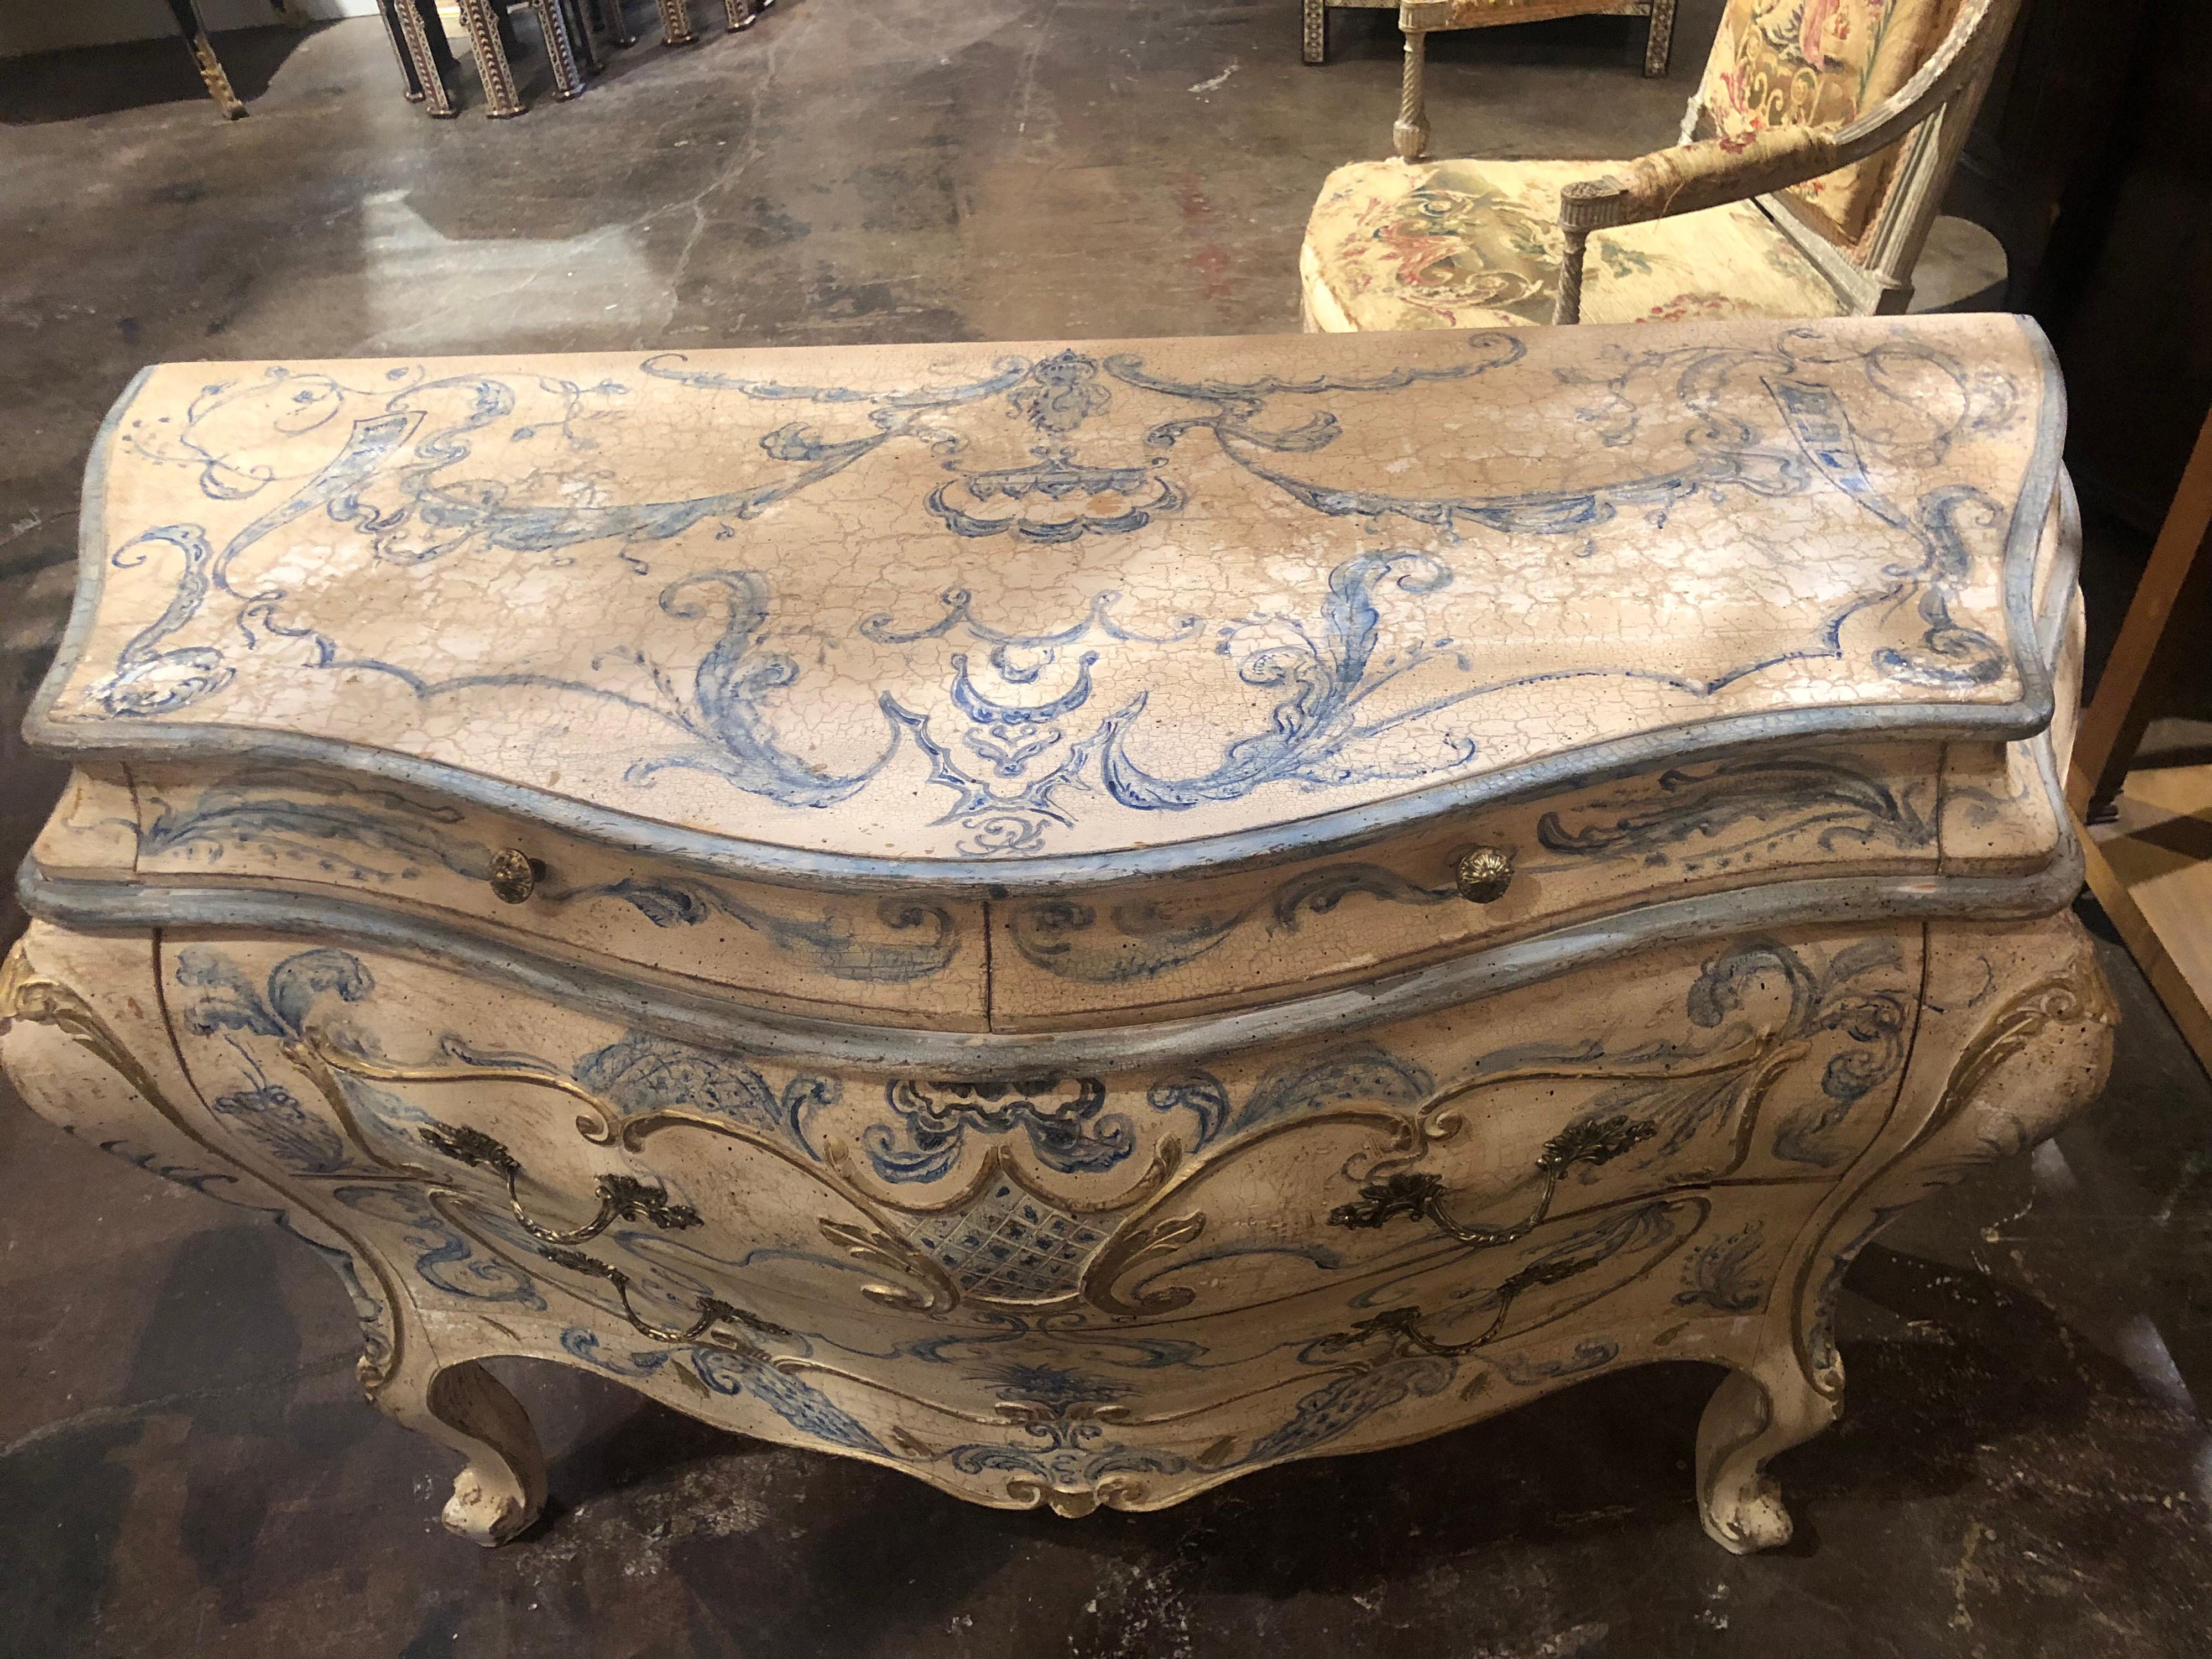 Lovely Italian bombe' shaped hand painted commode. Painted images of leaves, scrolls and flowers in an indigo blue color. The commode also has touches of gold gilt and the base color has a very nice patina as well, a truly unique piece!